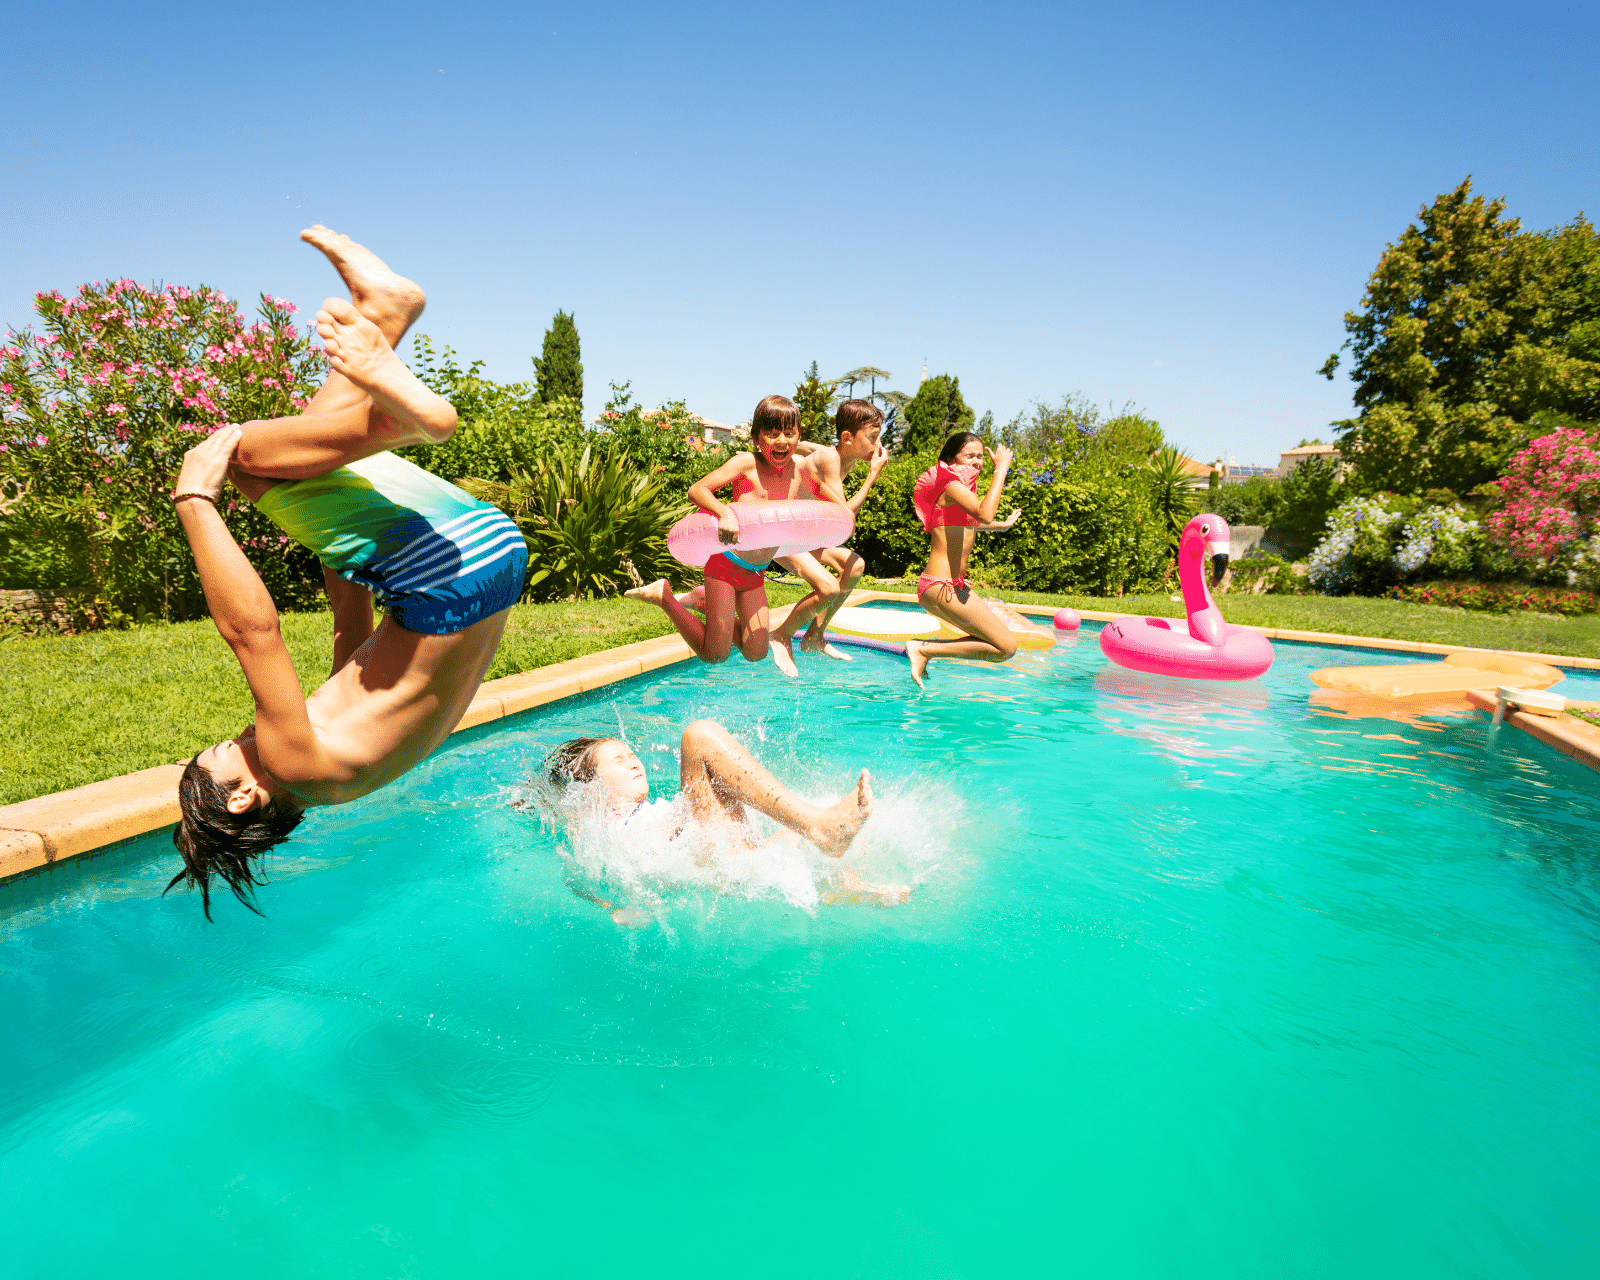 Kids jumping in a pool